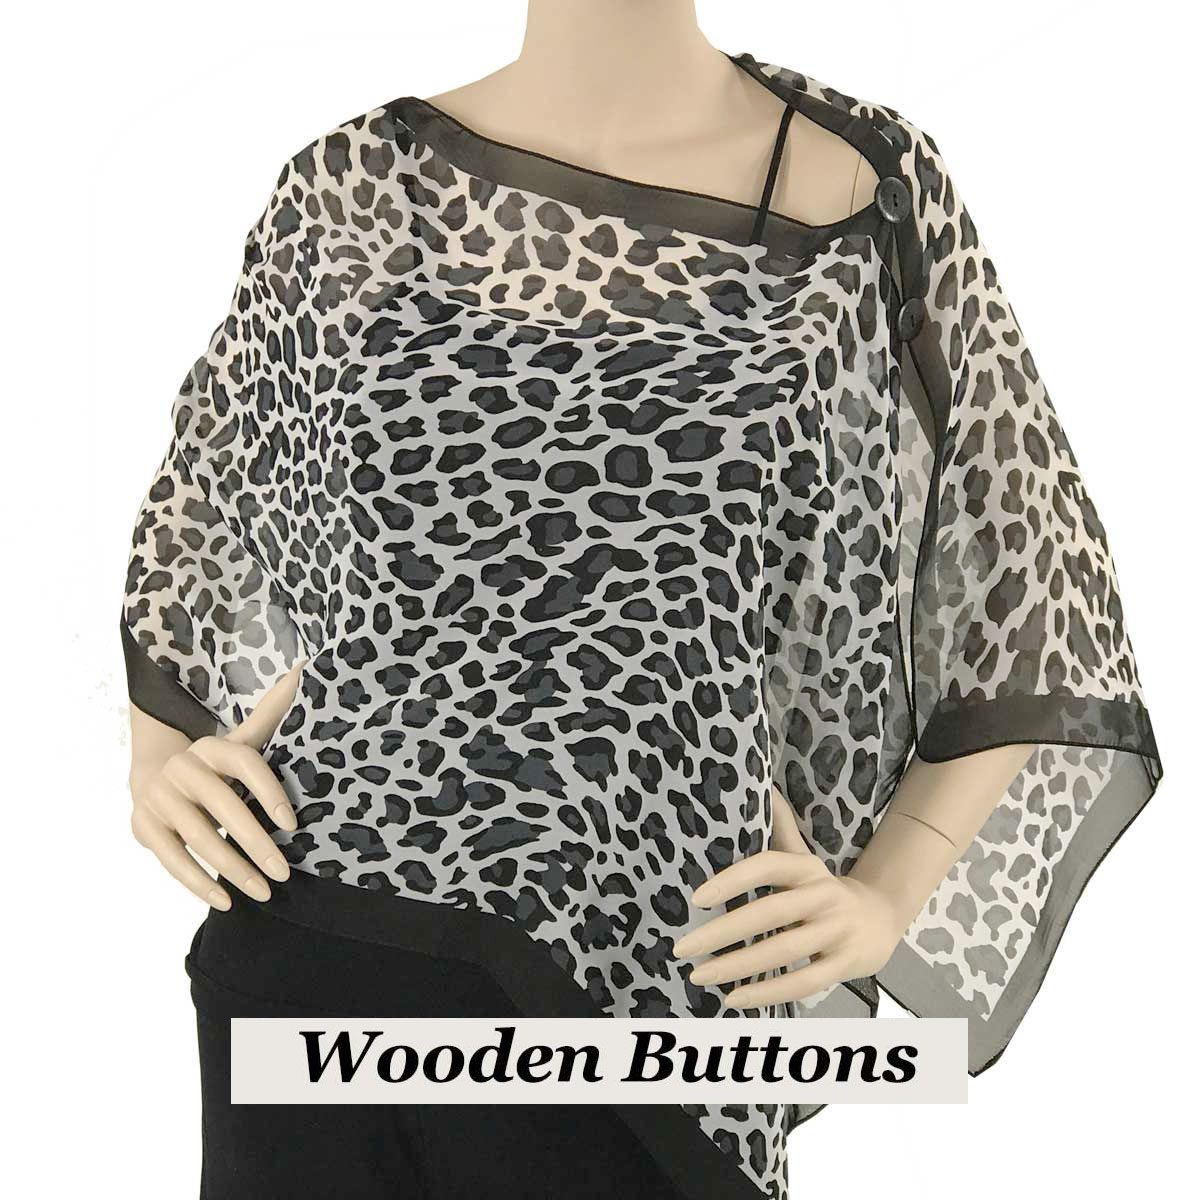 SBW-104BW Black Wooden Buttons<br>Cheetah Black-White